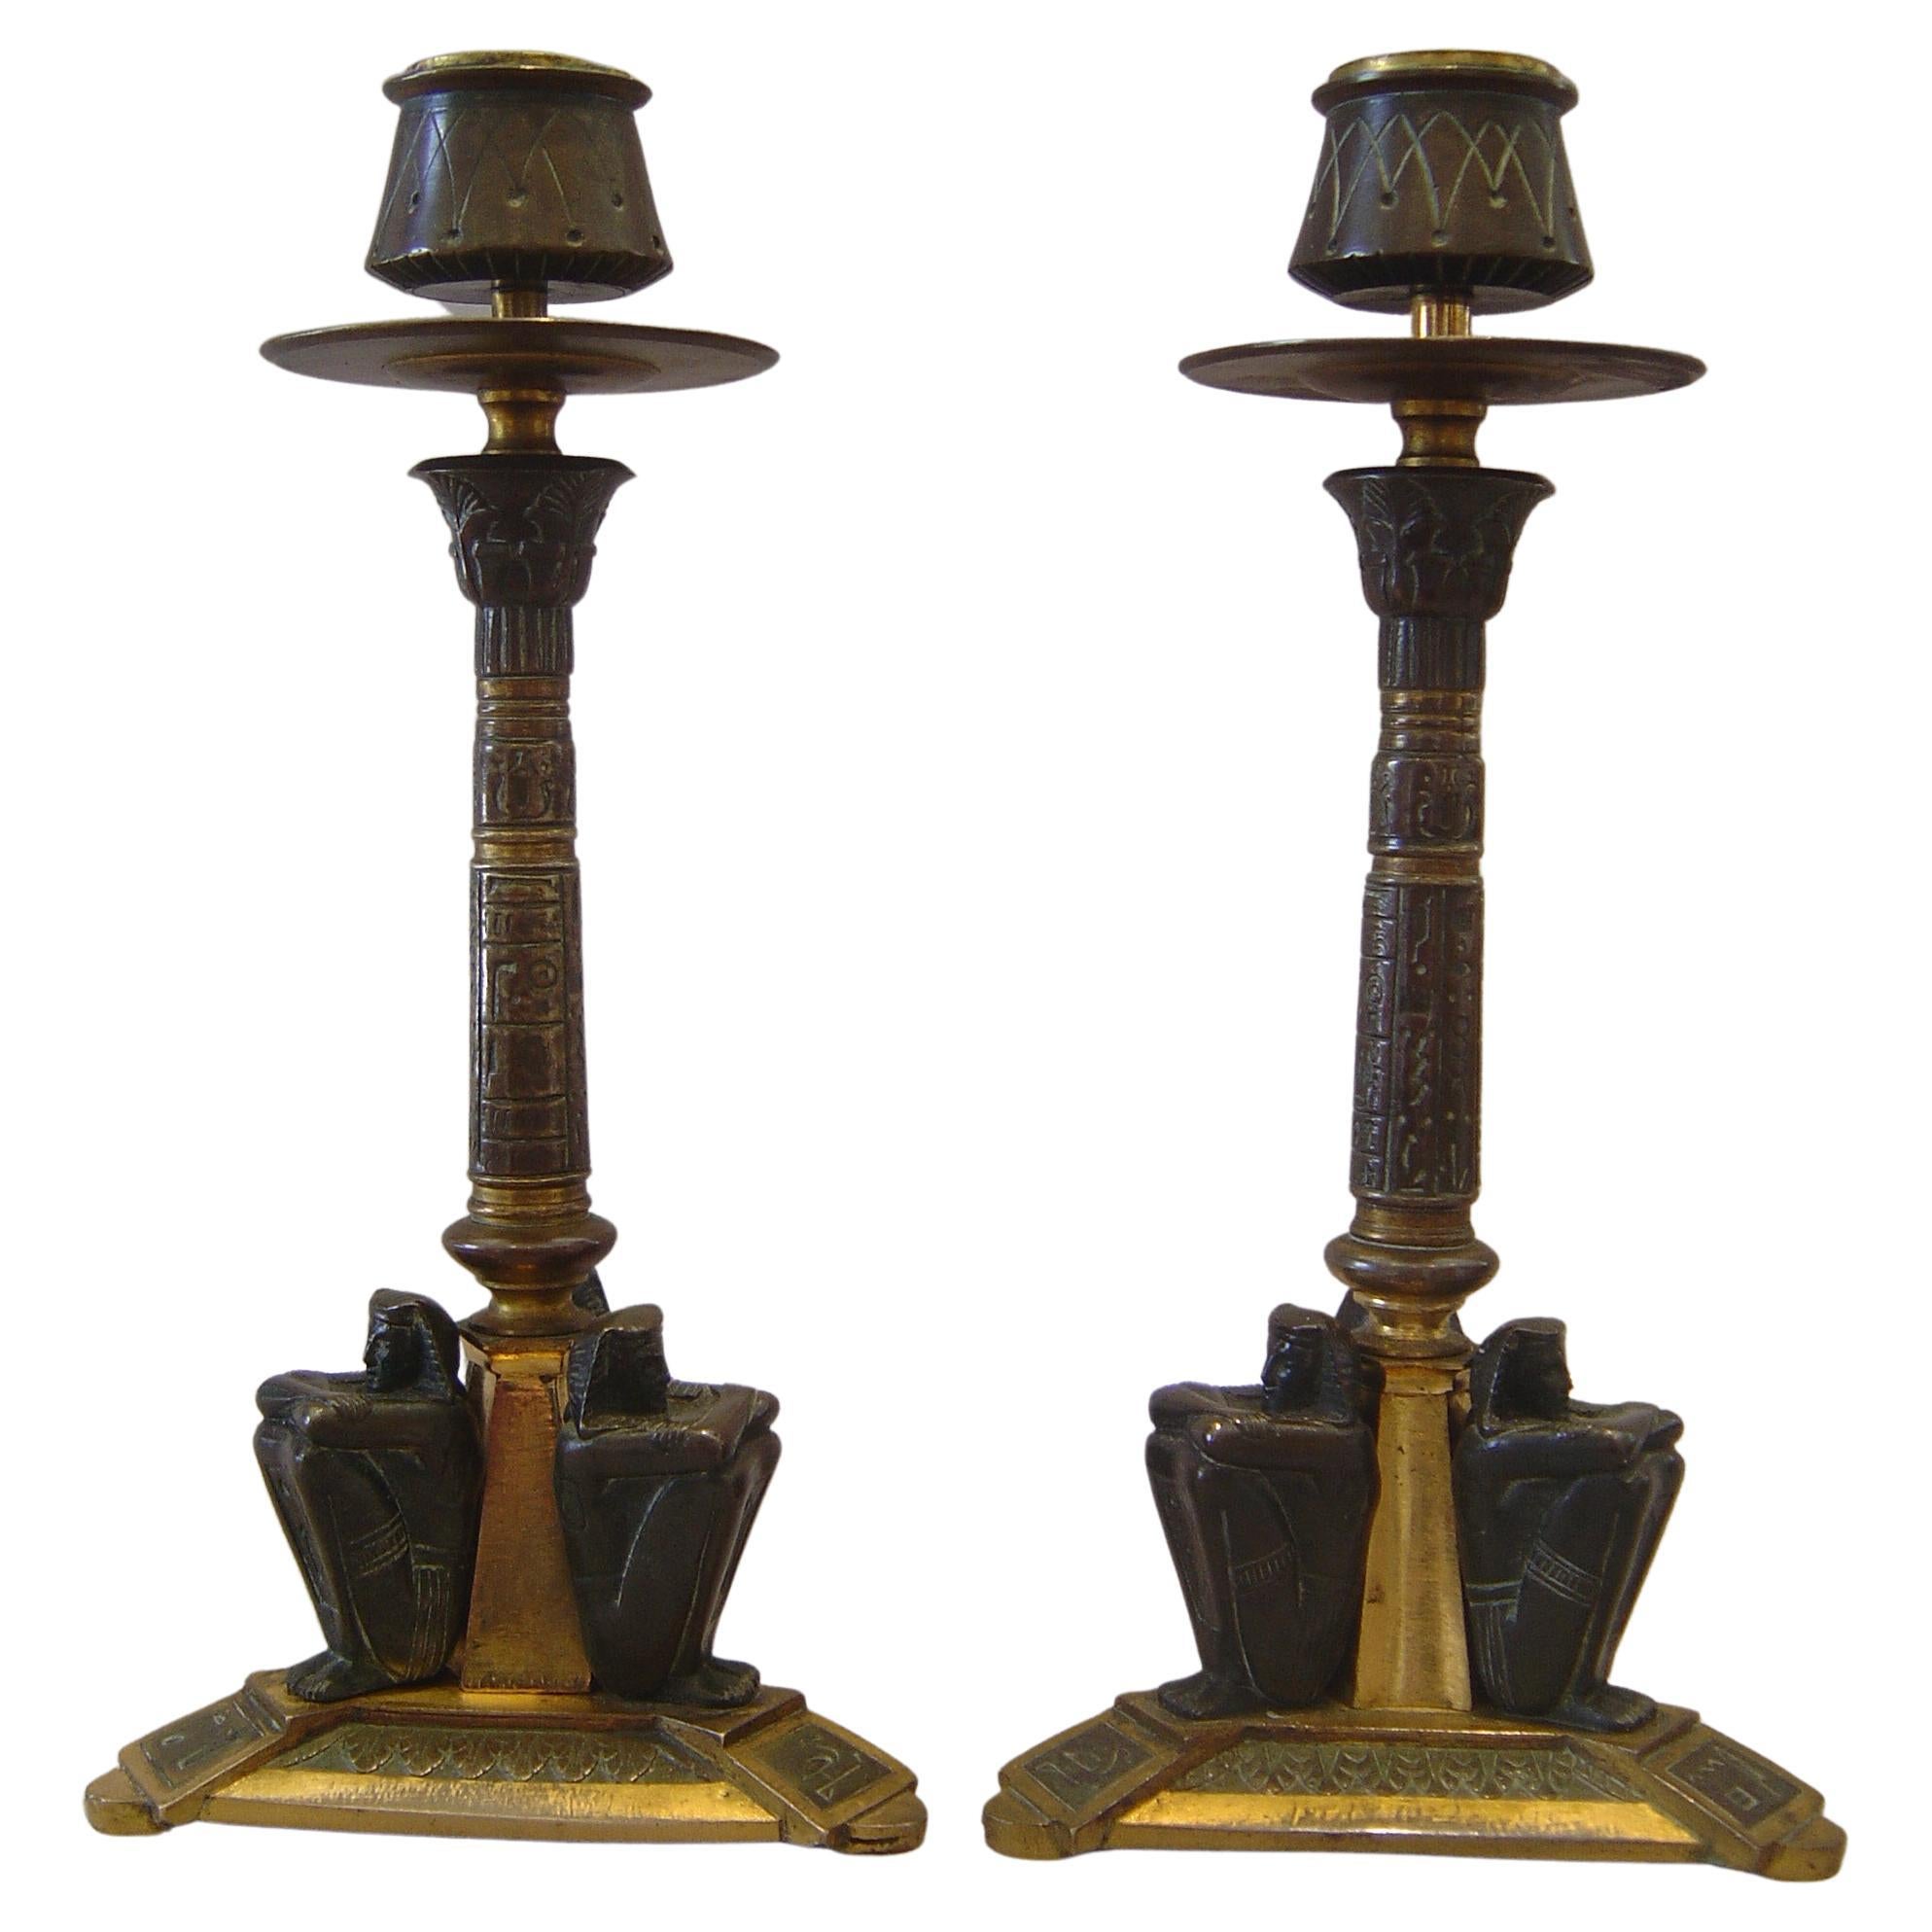 French 19th century Egyptian revival candlesticks in patinated bronze and ormolu